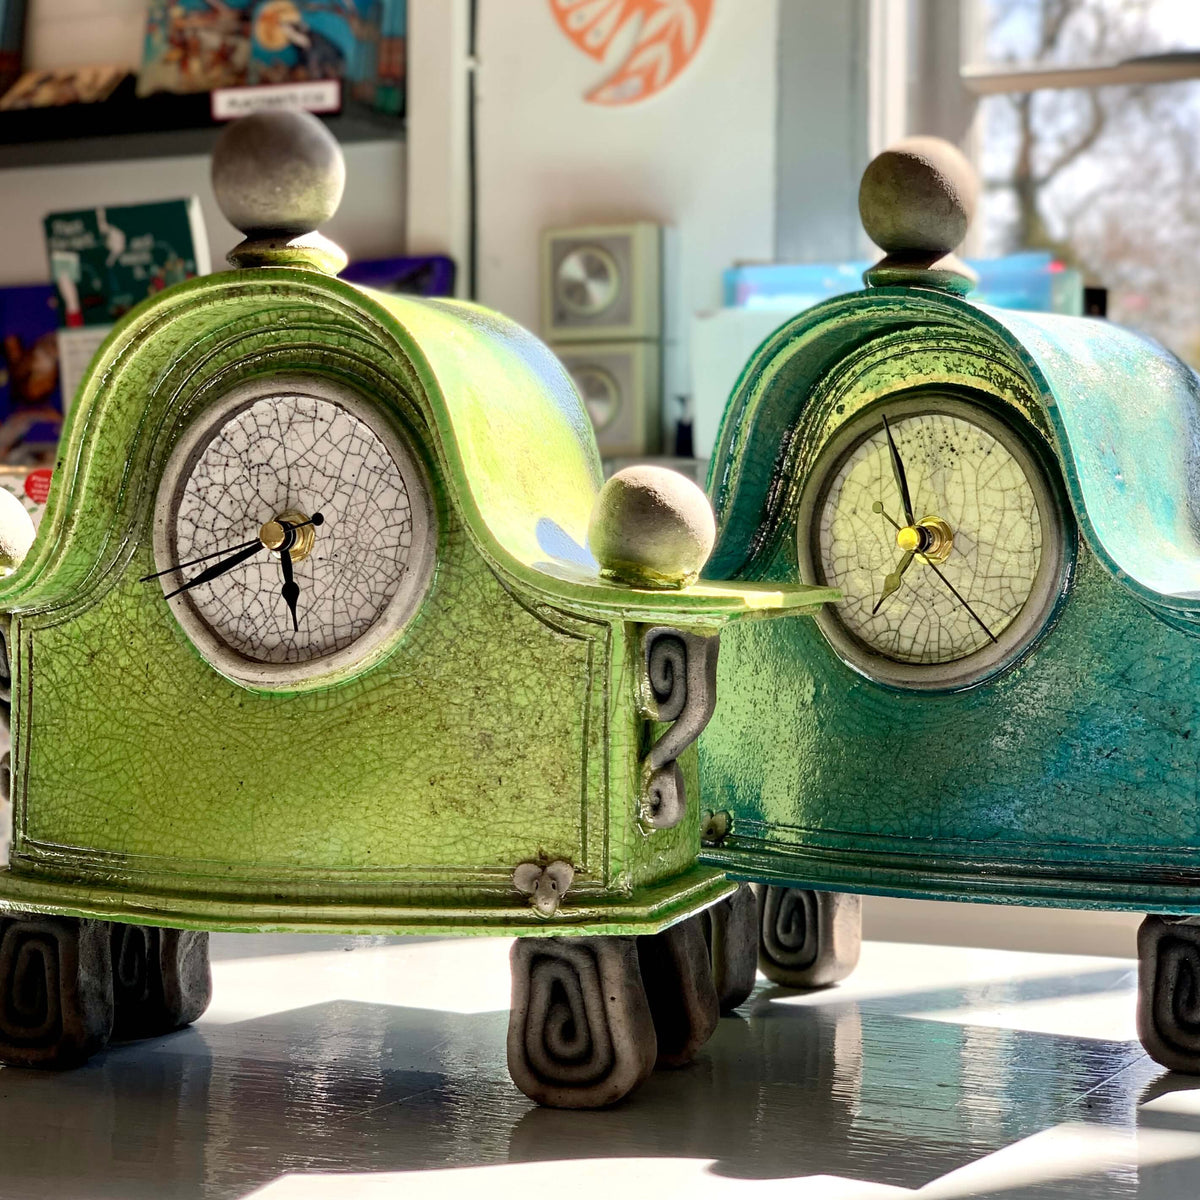 Handcrafted green and turquoise ceramic raku fired clocks, made by stonesplitter in the UK.